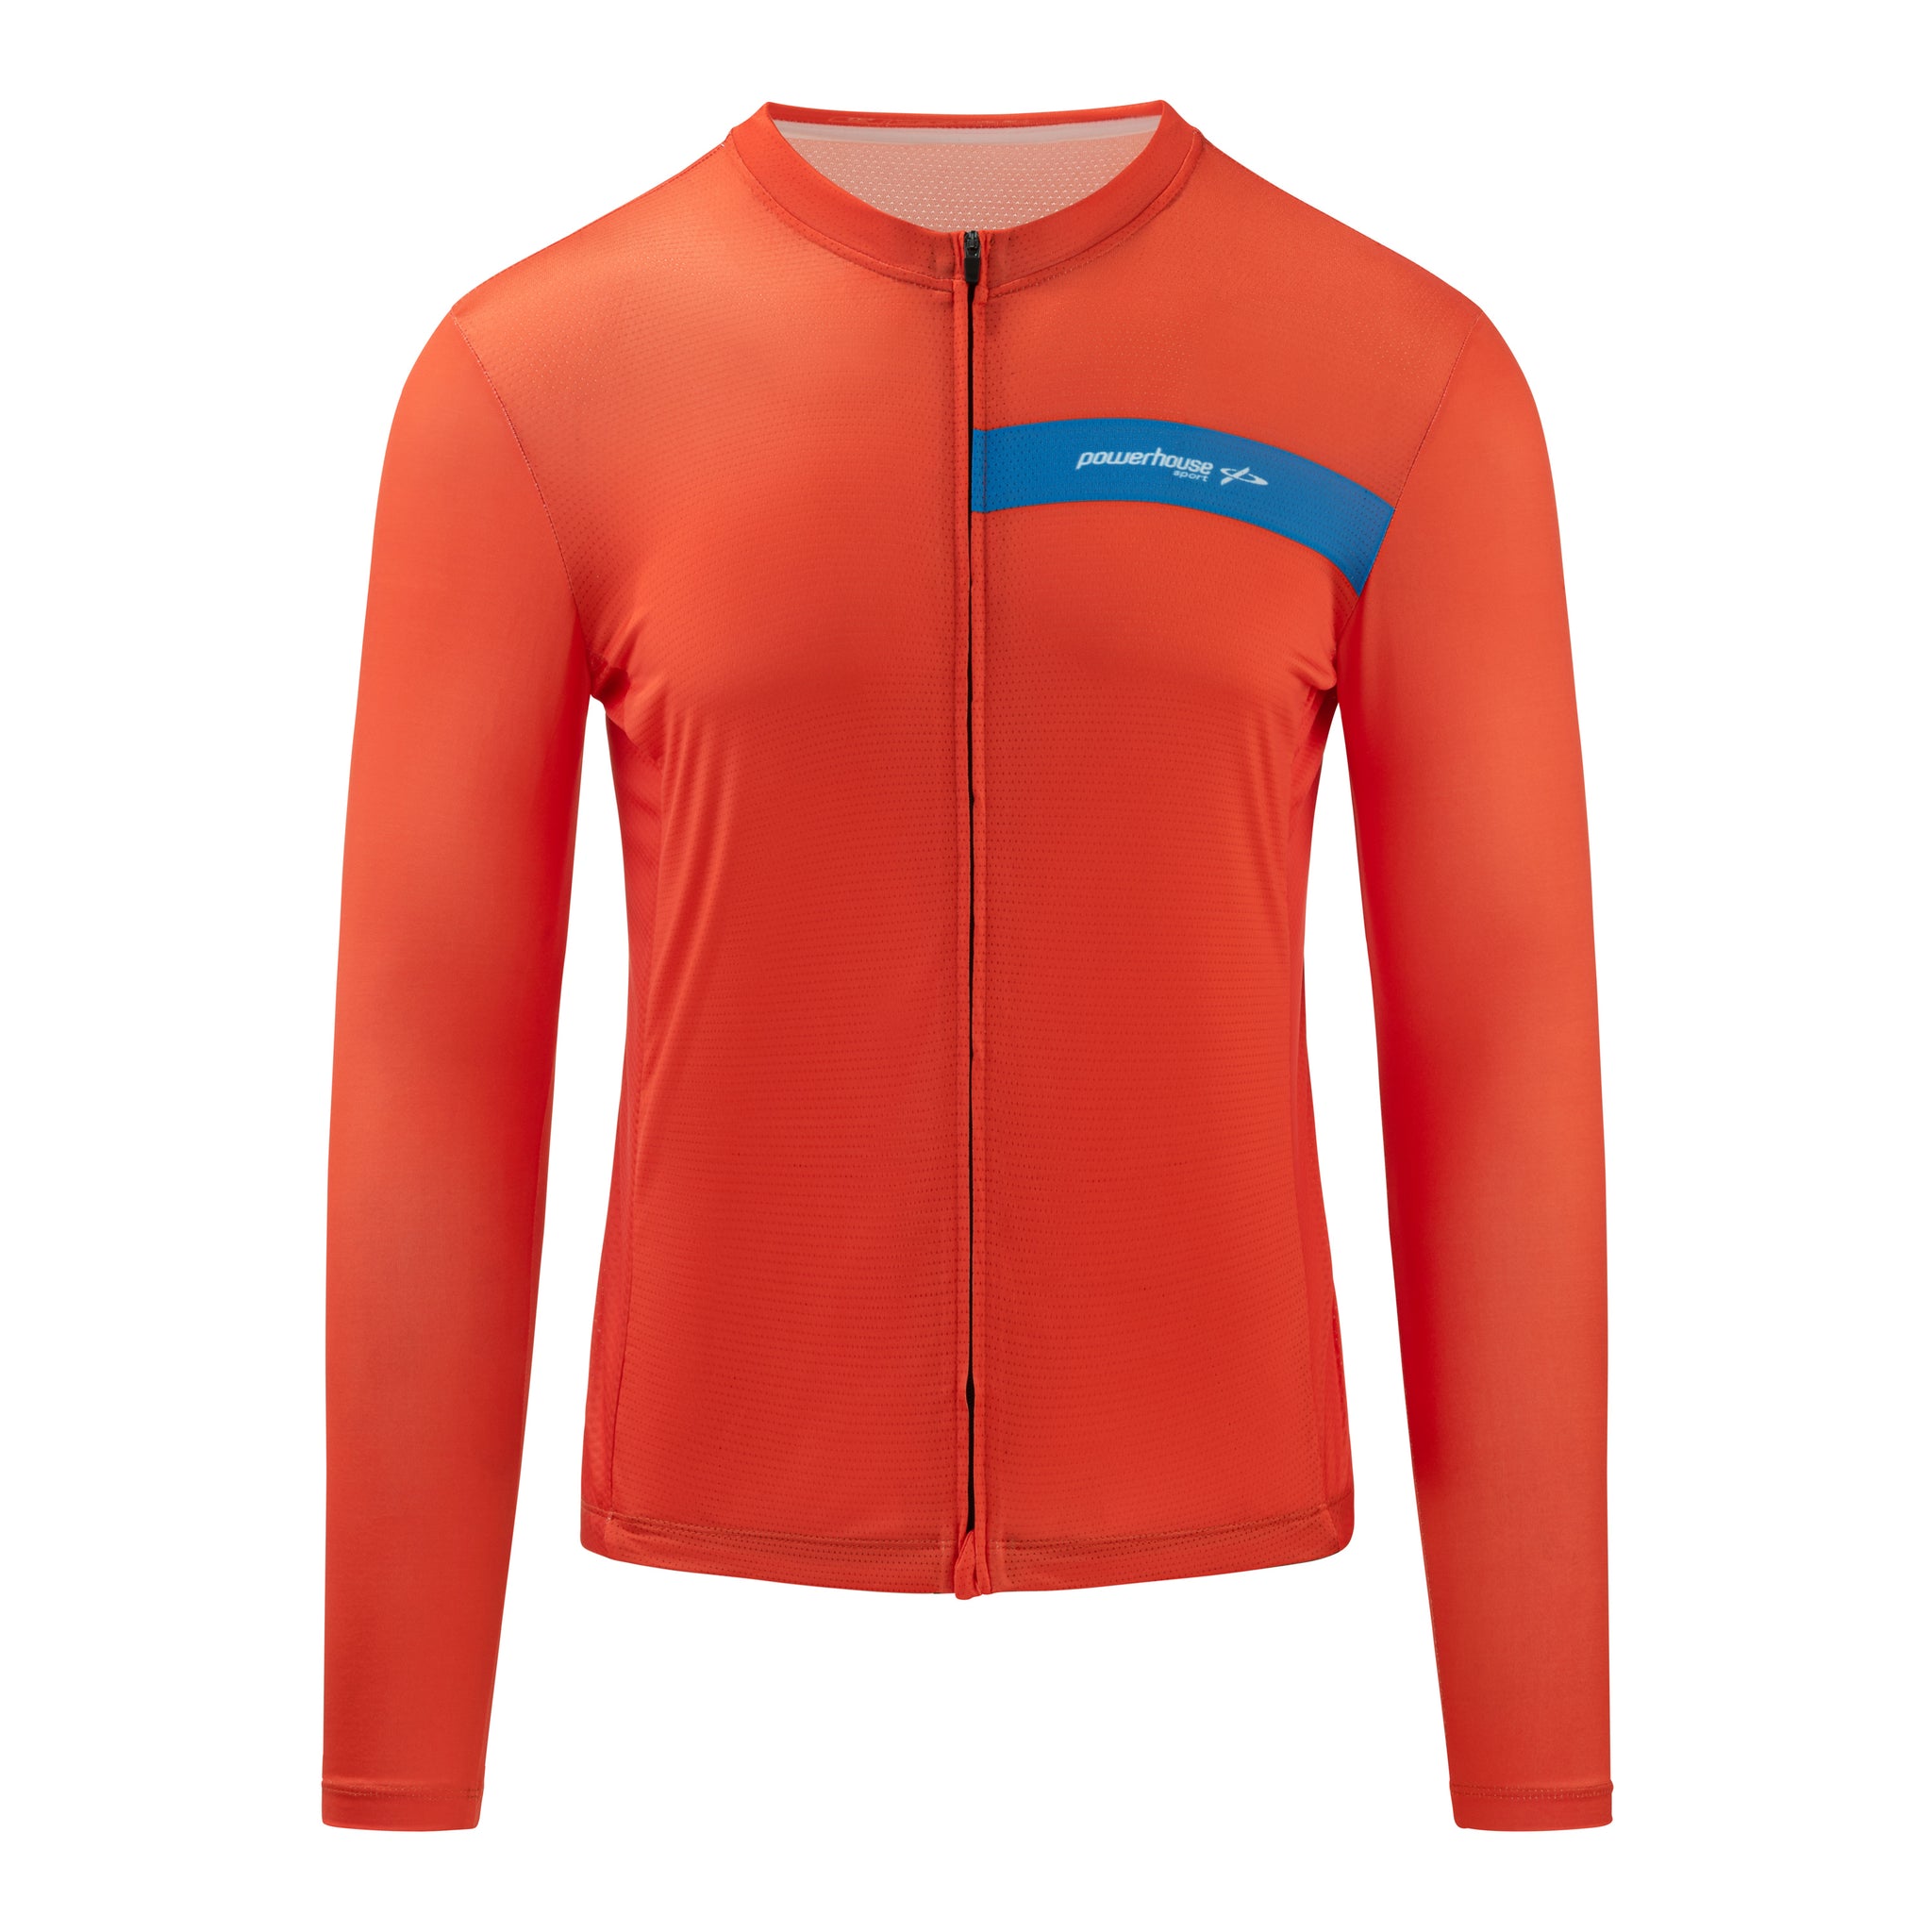 Flame Jersey LS Womens